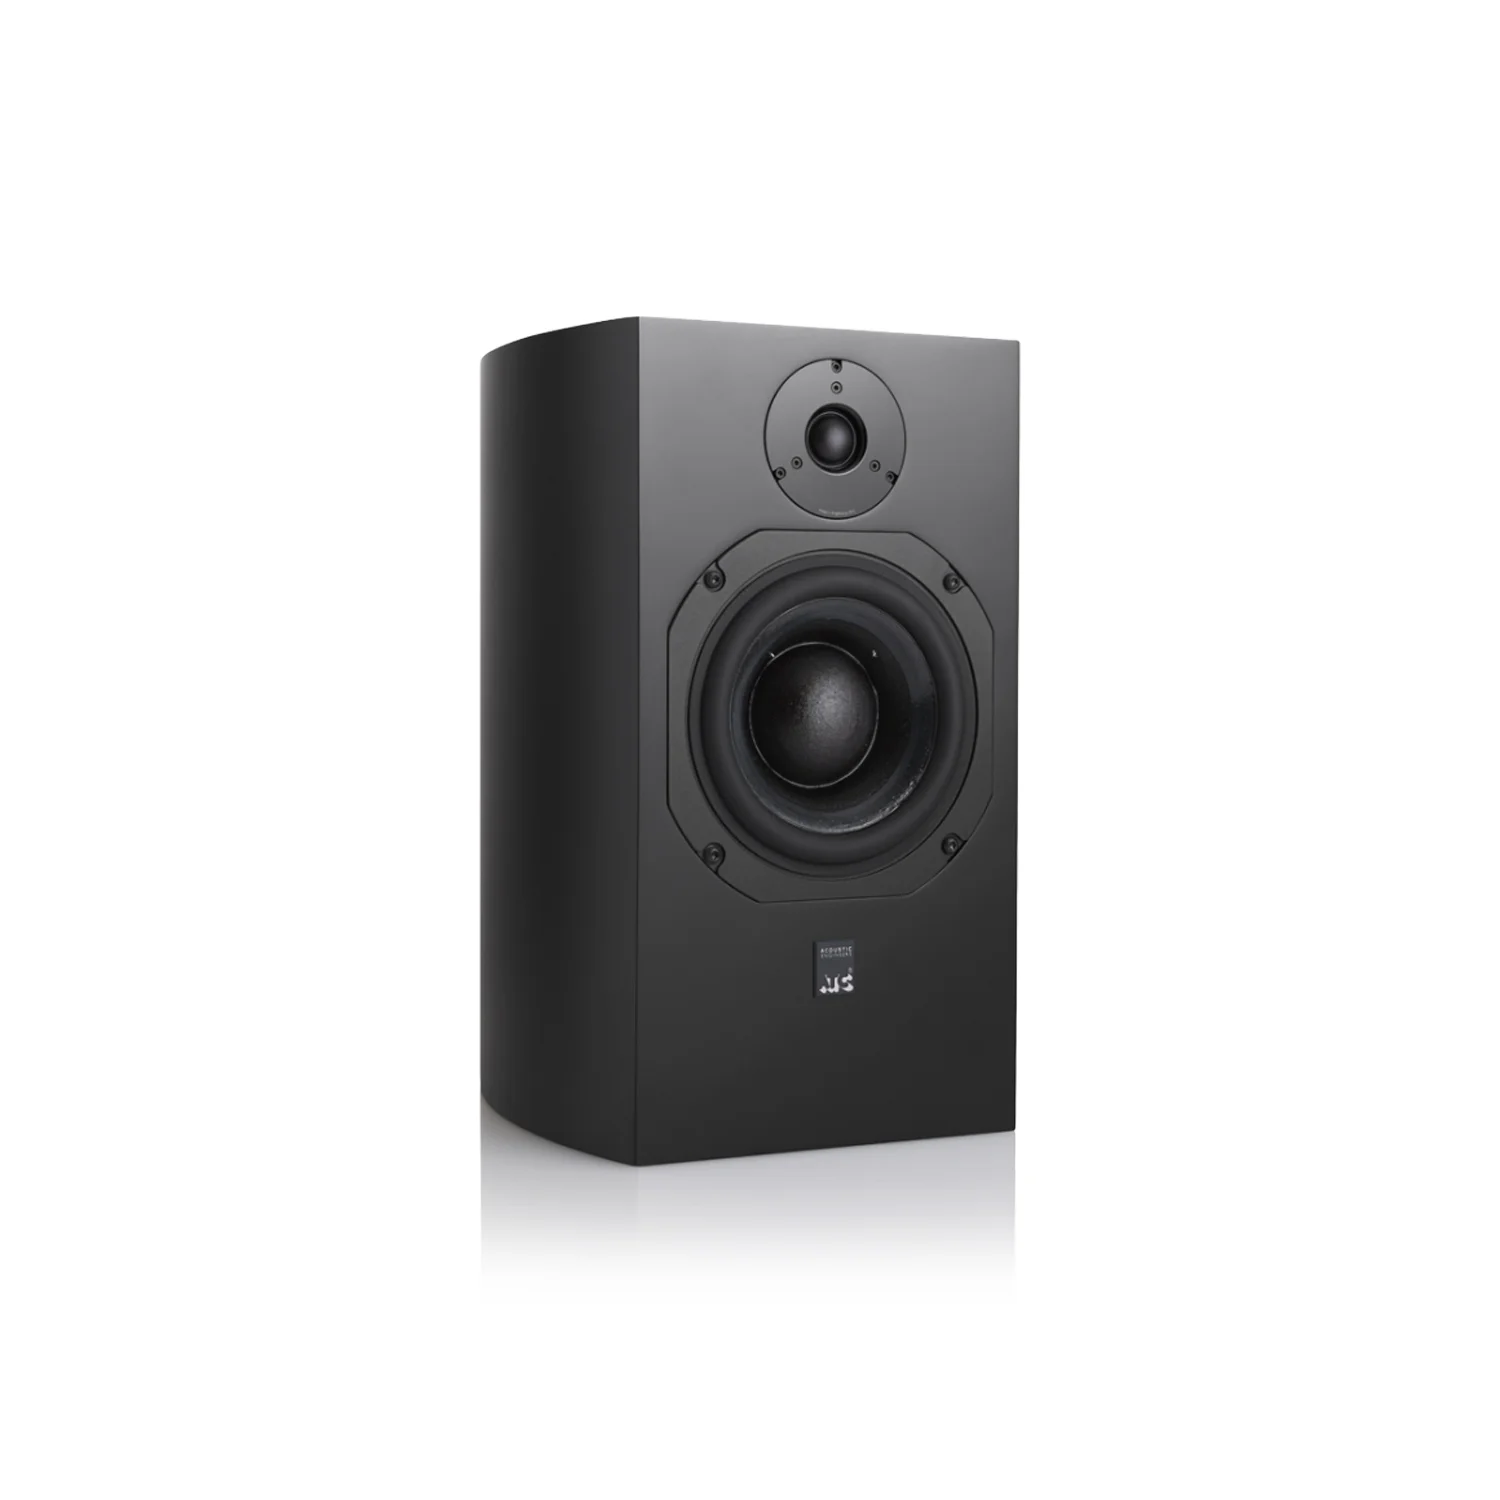 Powerful yet compact, the ATC SCM19 loudspeakers impress